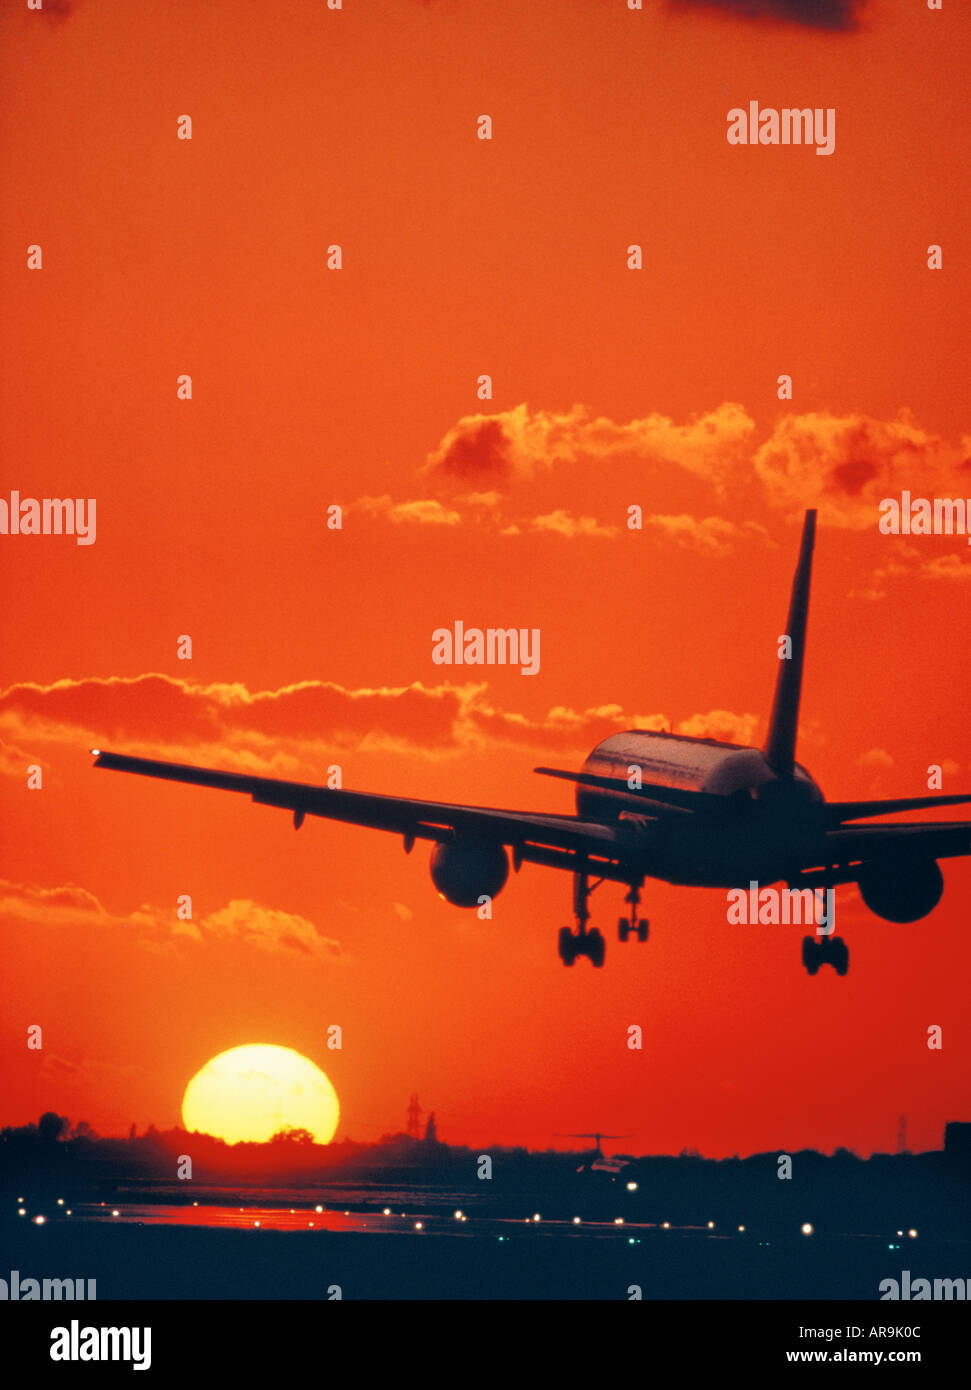 Boeing 757 jet in the air runway lights heading into an golden orange sky at sunset sunrise dusk showing jet thrust exhaust poll Stock Photo